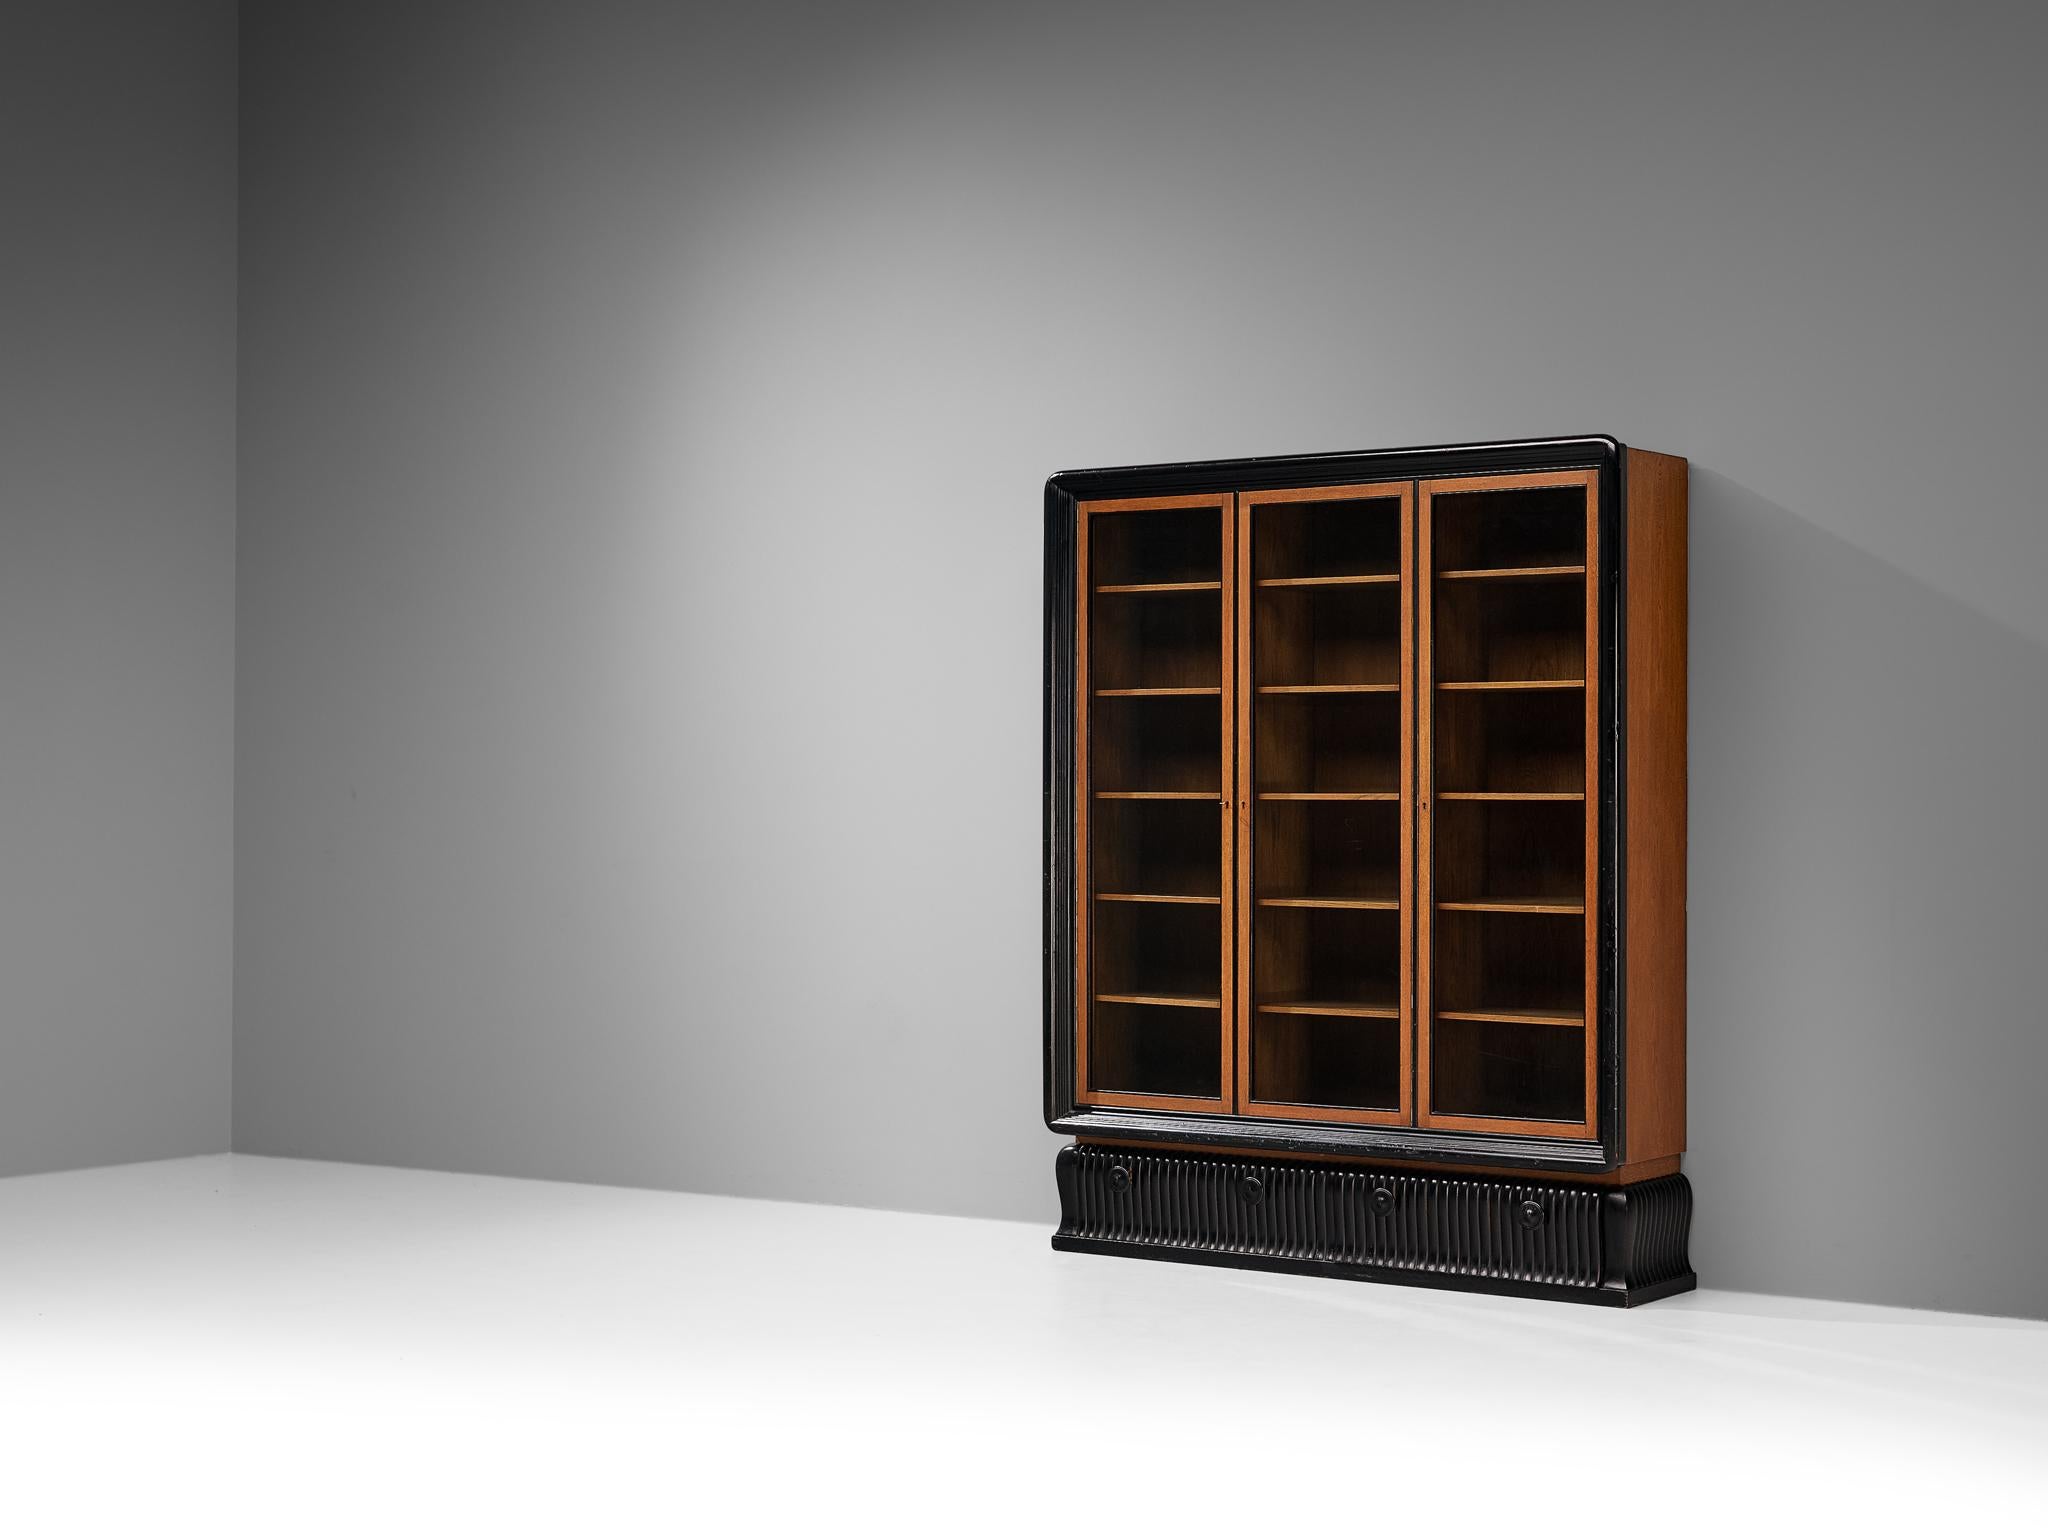 Large cabinet, oak, lacquered wood, original glass, Sweden, 1930s.

This large cabinet made in Sweden in the 1930s has a dark and theatrical appearance. This substantial piece is made in oak and black lacquered wood, and has beautiful original glass